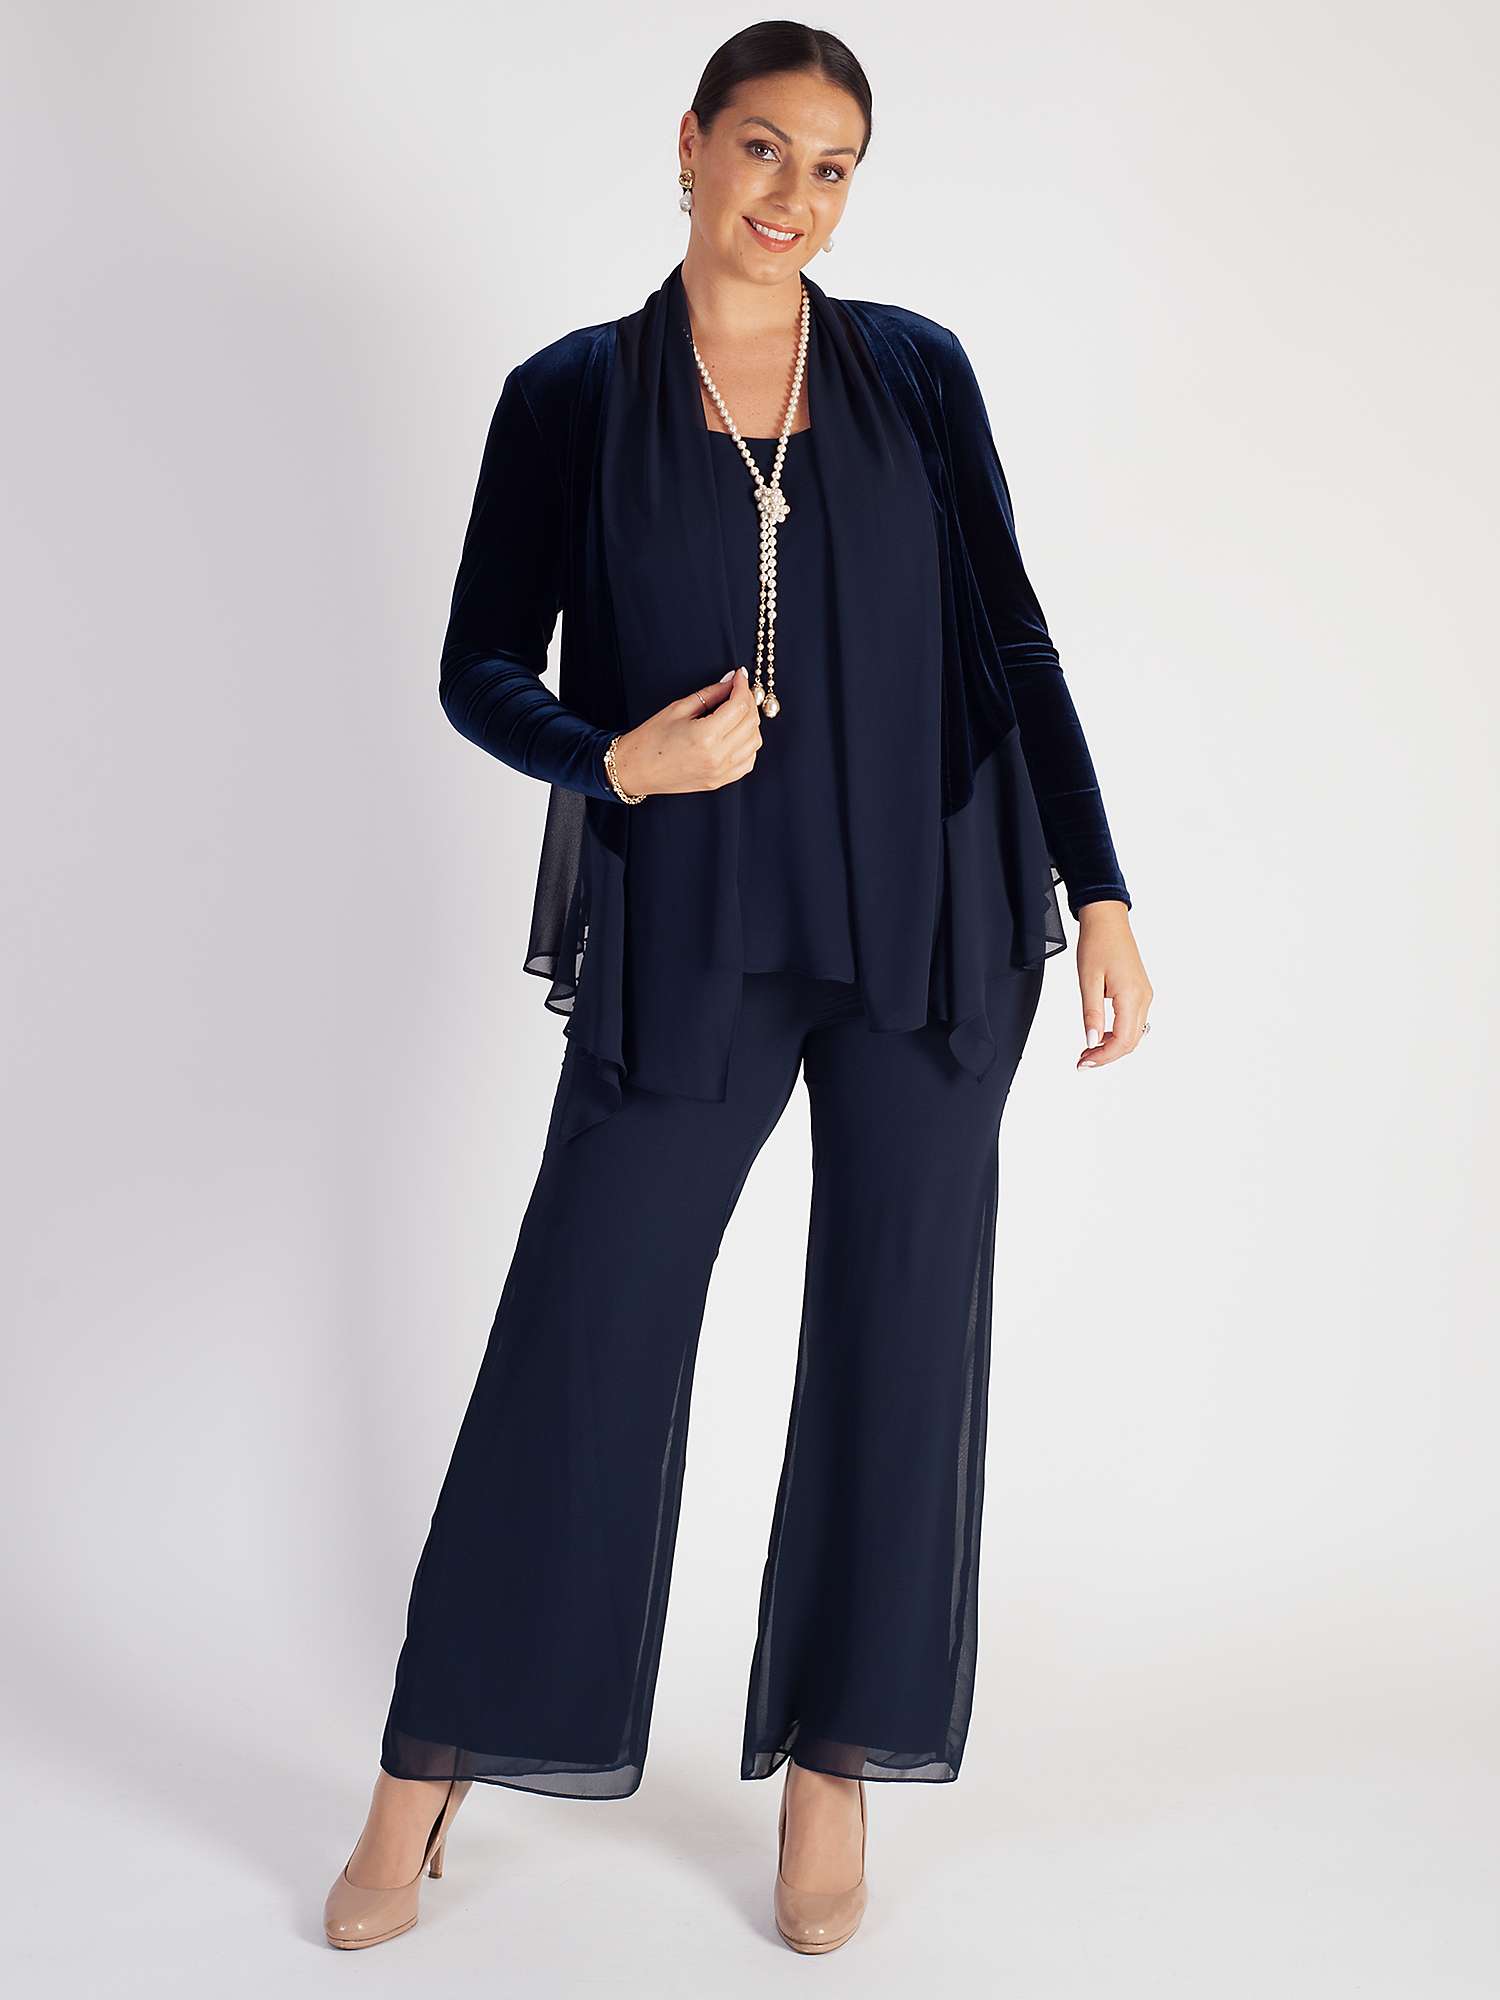 chesca Chiffon Trousers, Navy at John Lewis & Partners